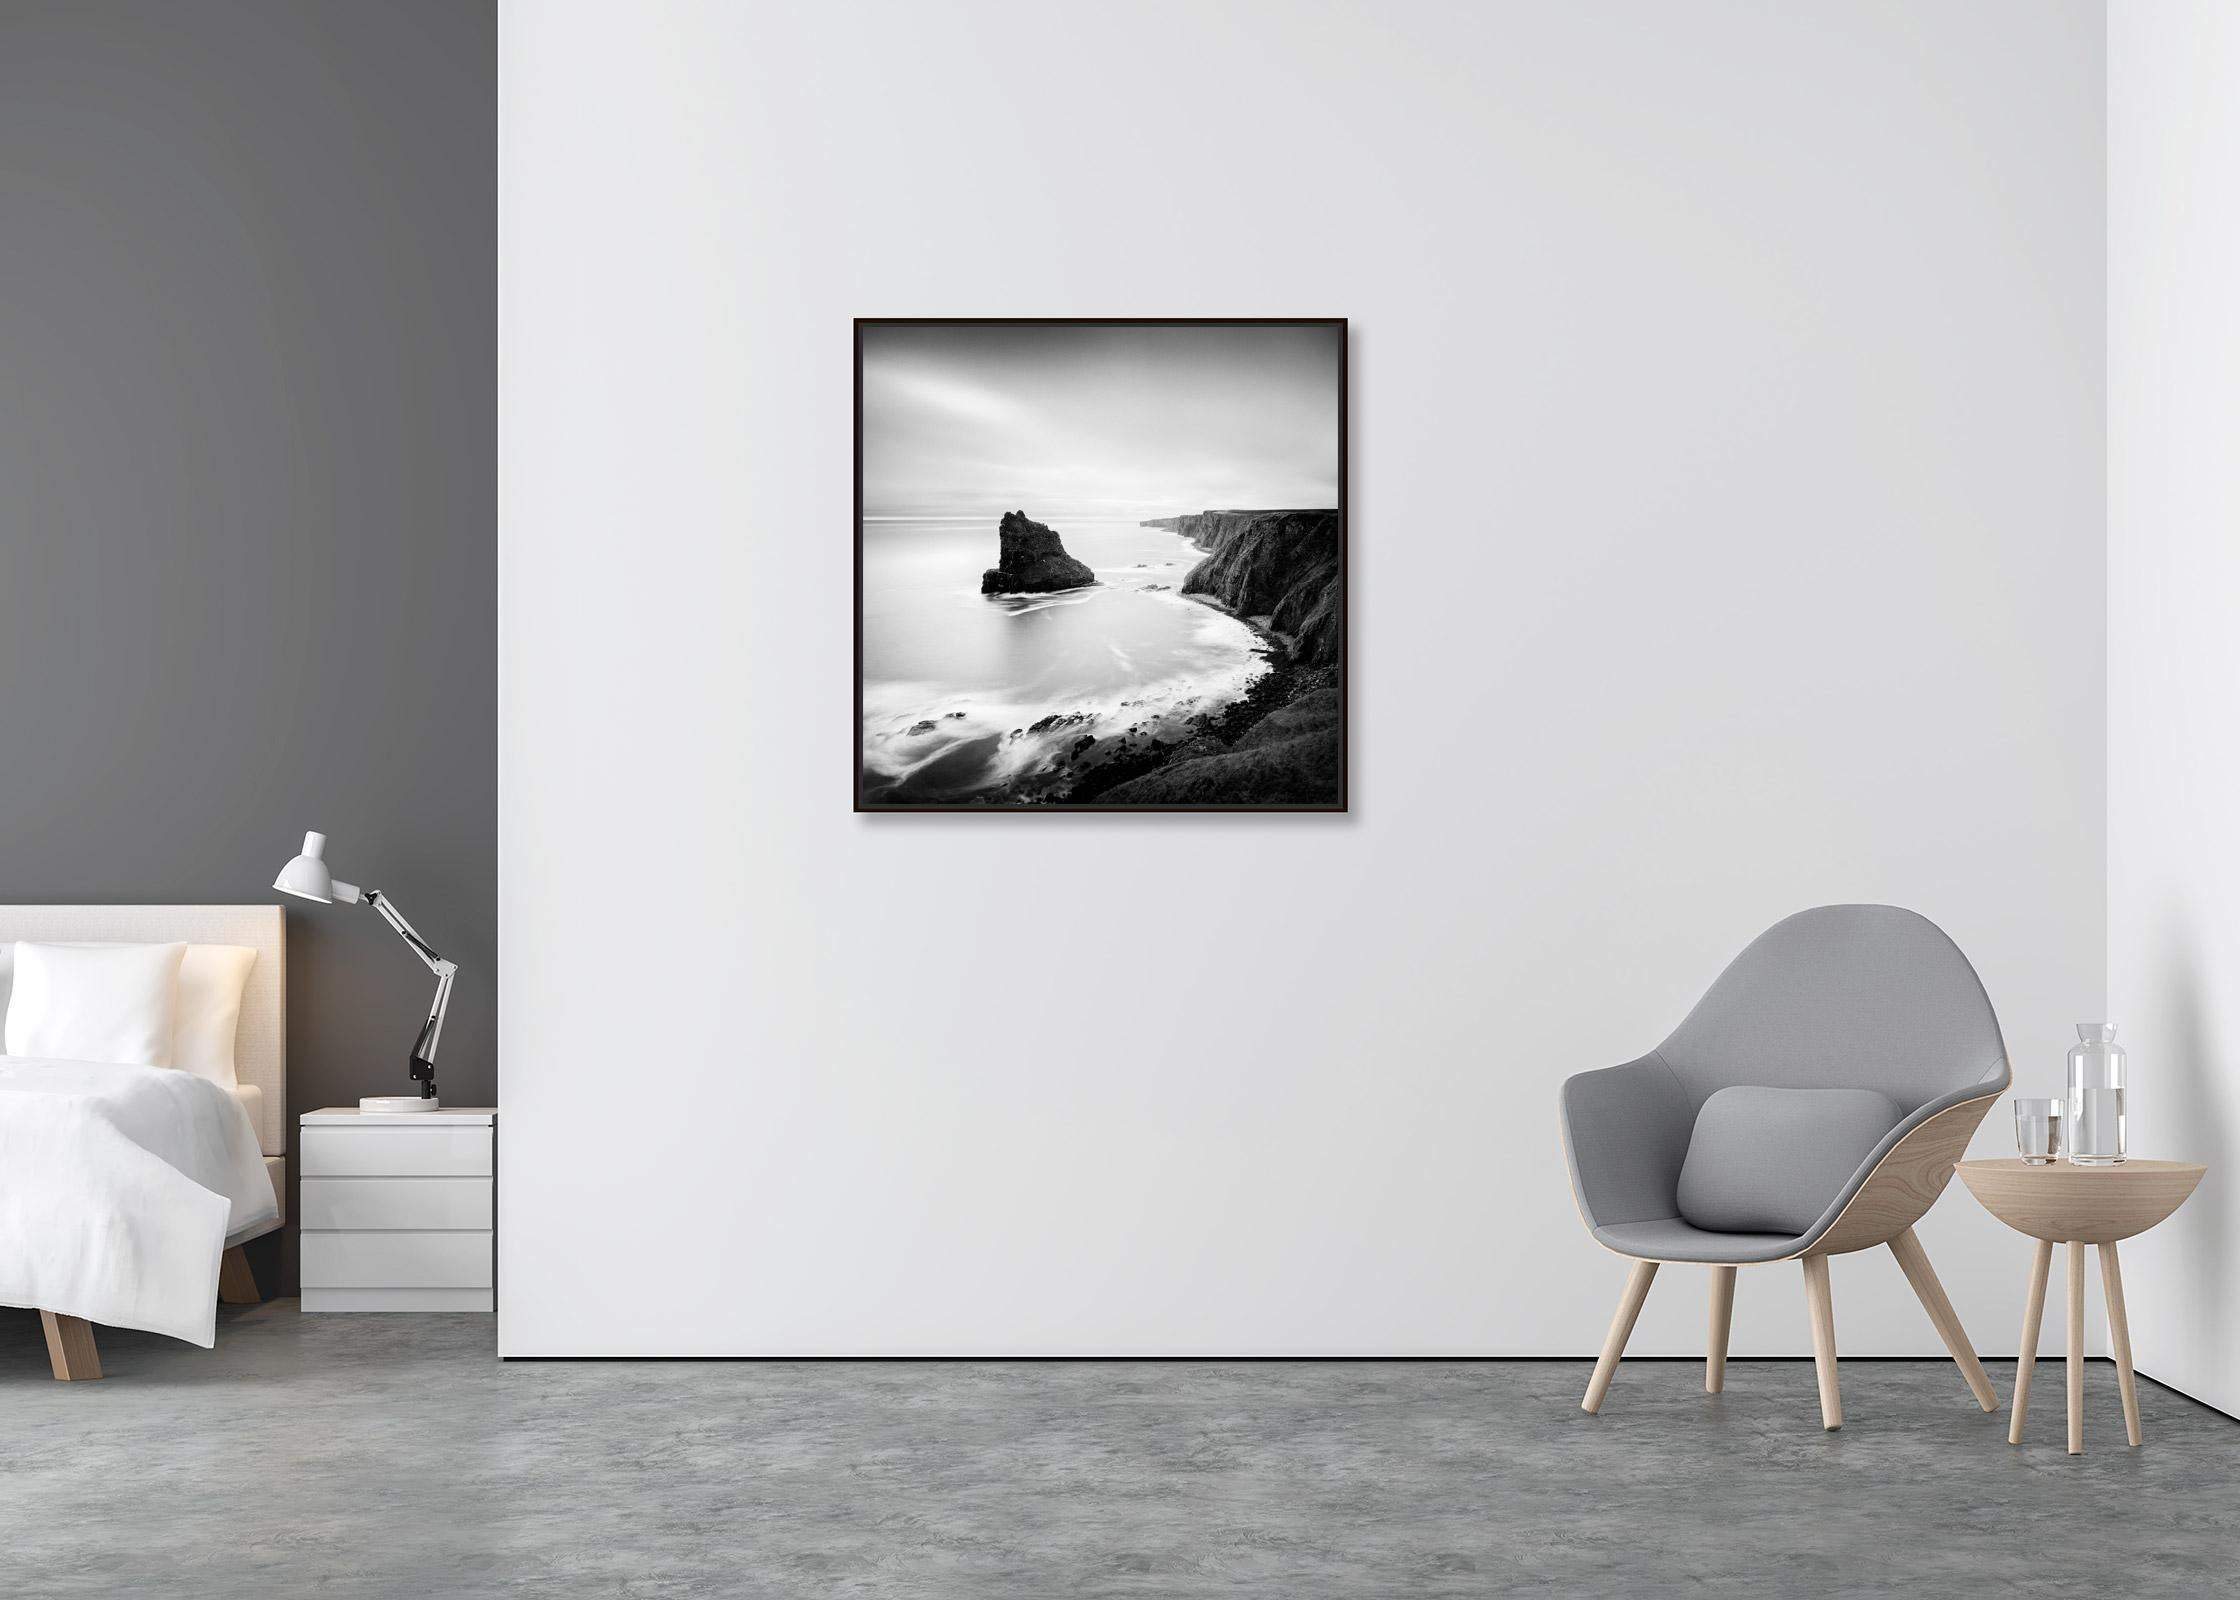 Surreal Moment, scottish coastline cliff, black and white photography, landscape - Contemporary Photograph by Gerald Berghammer